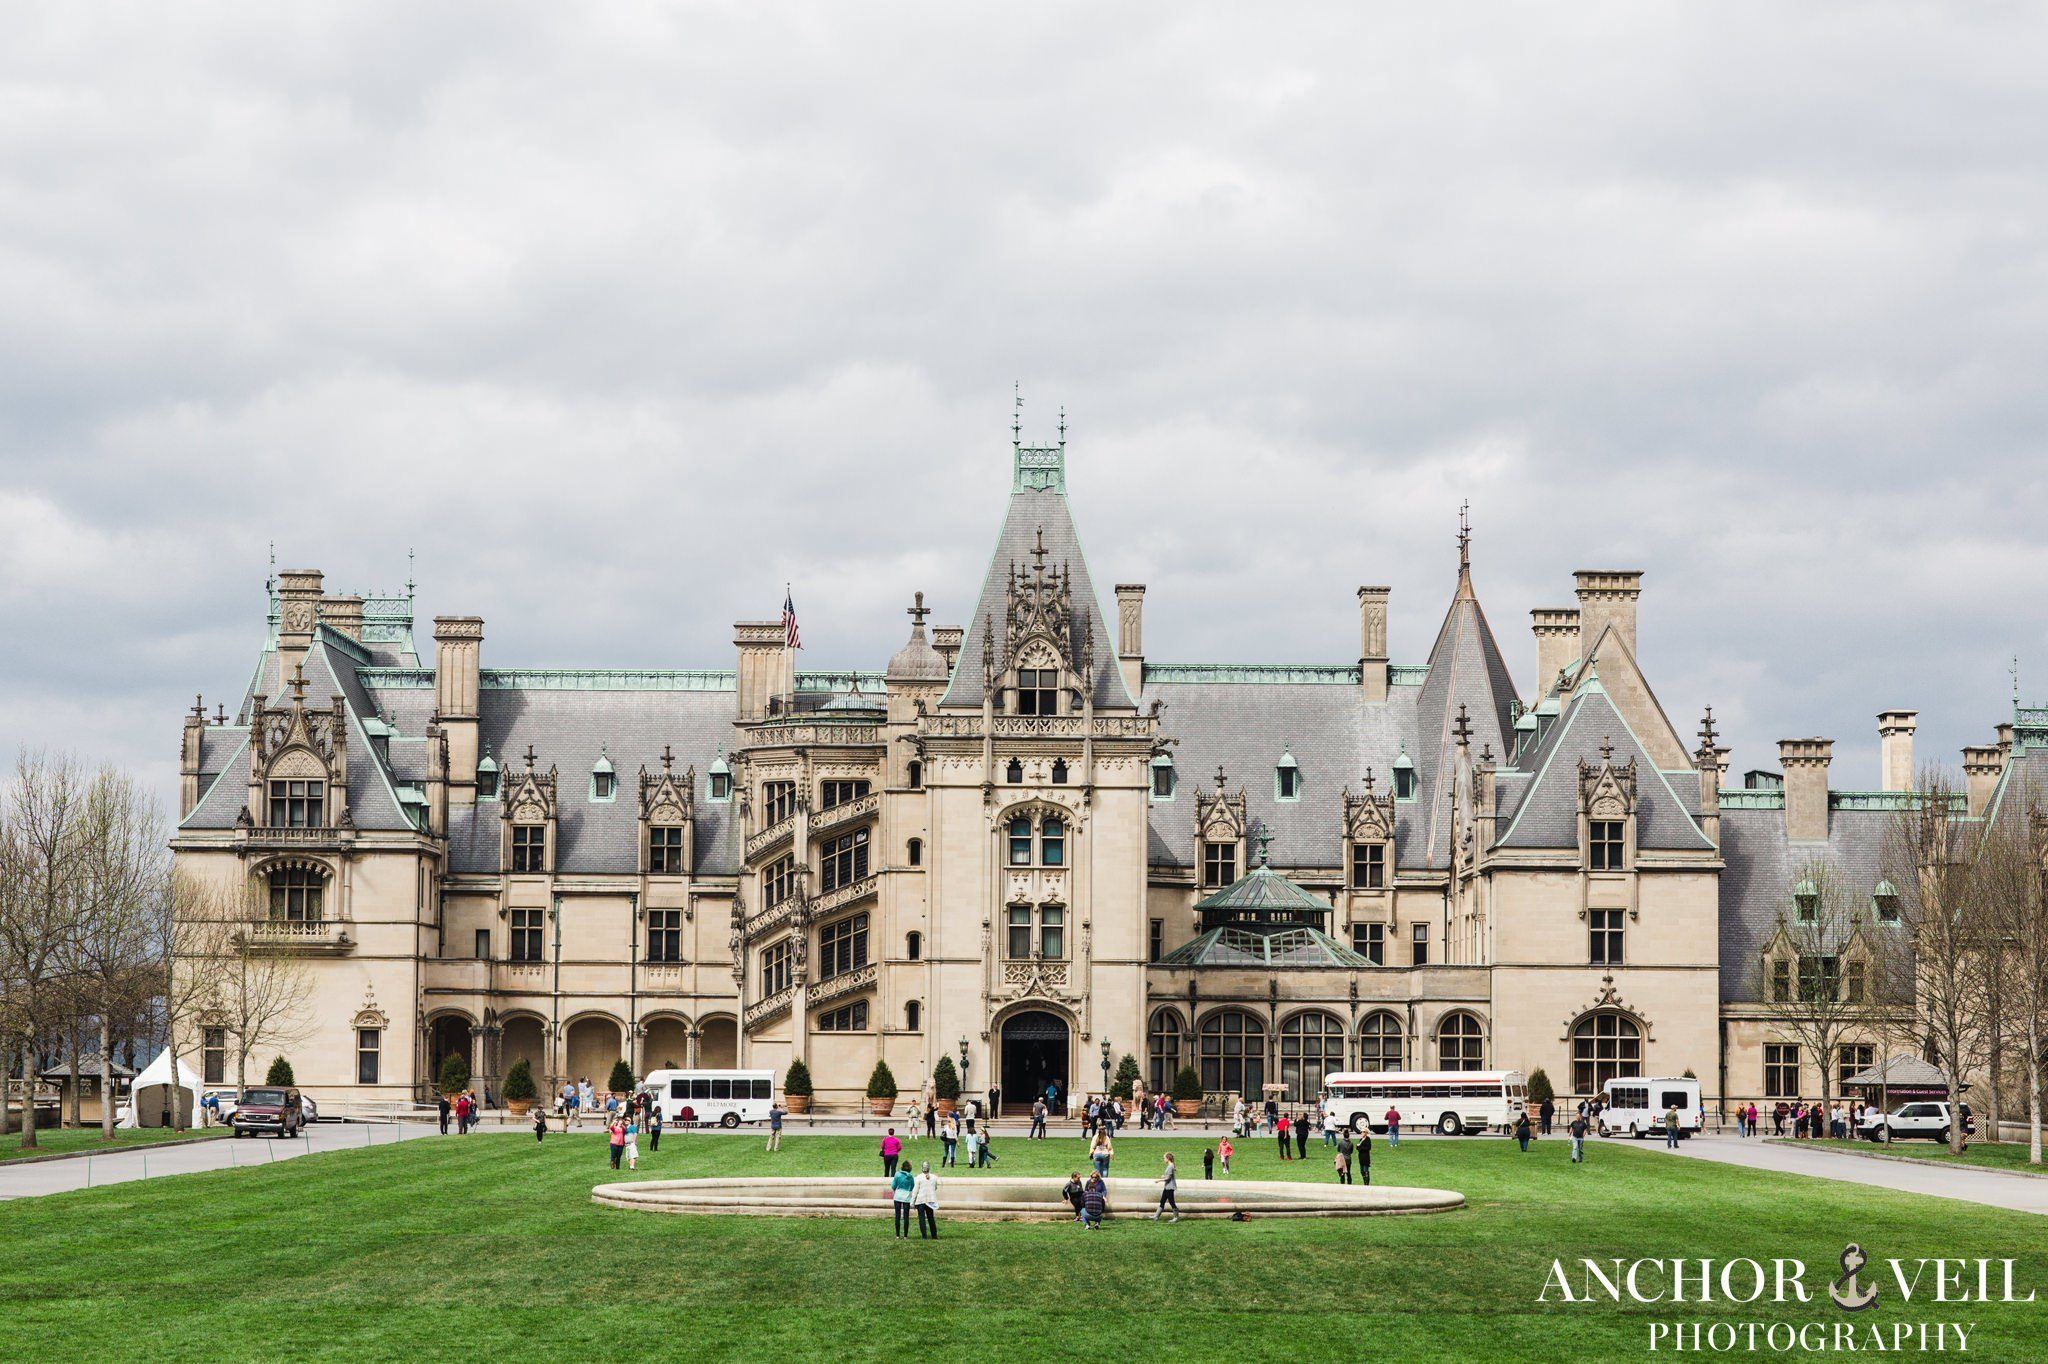 The Biltmore estate building on the lawn